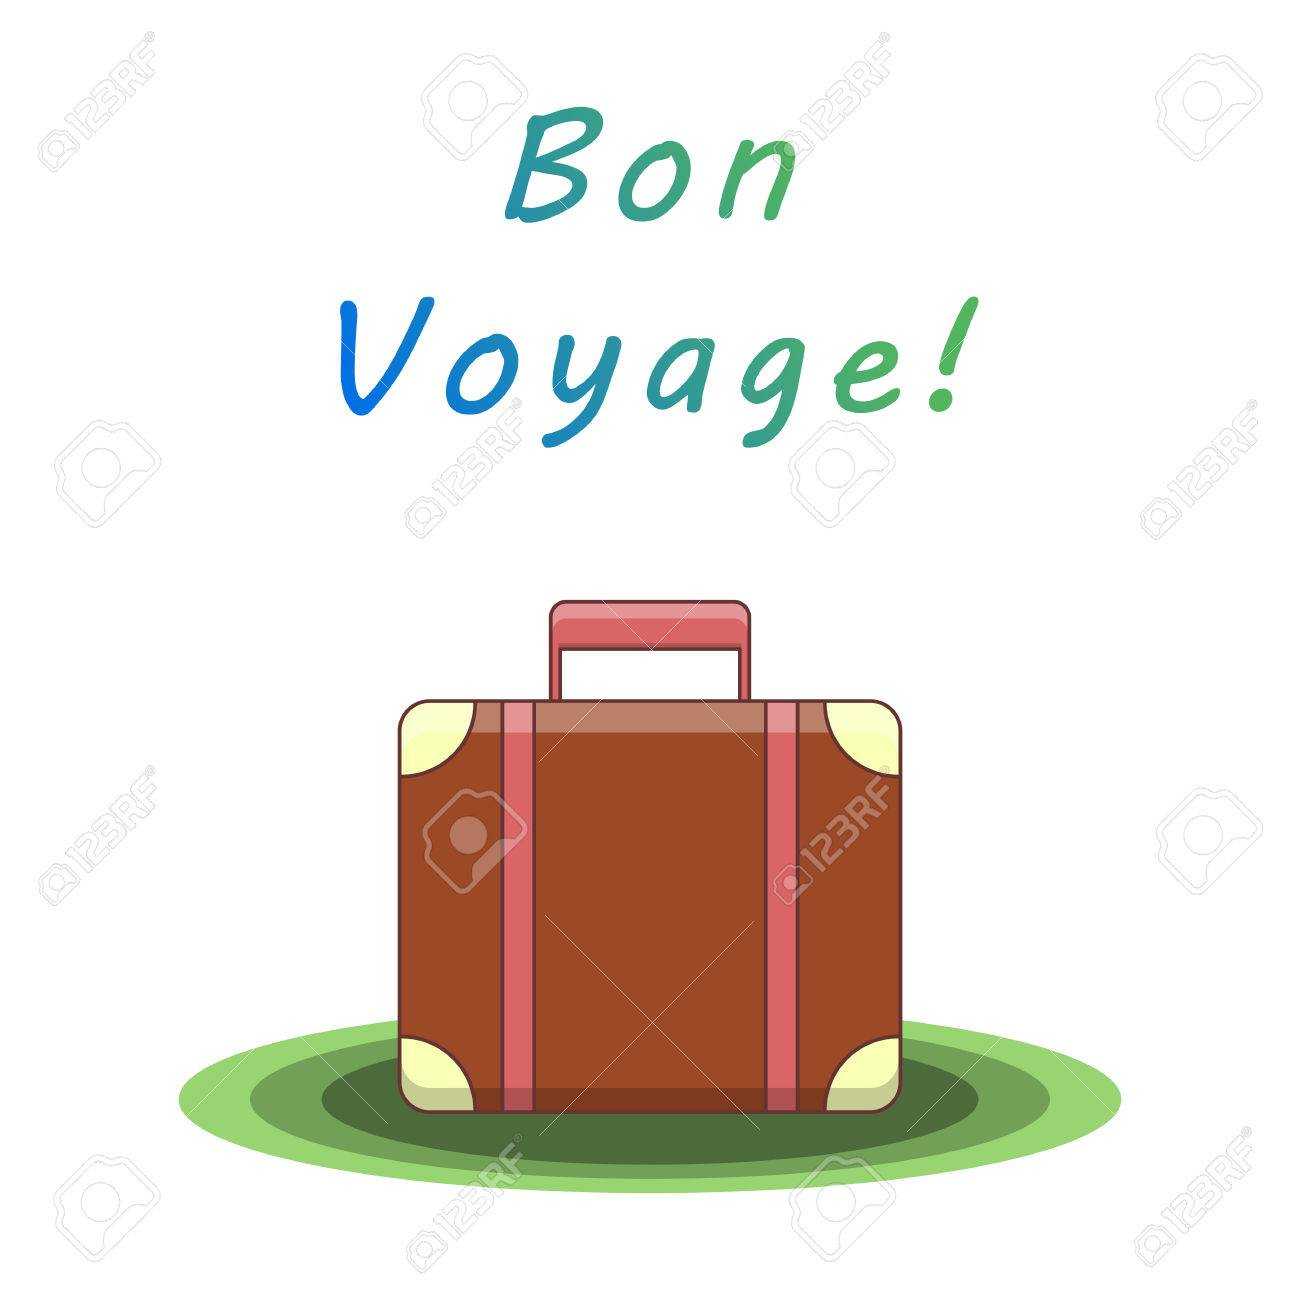 Bon Voyage. Suitcase For Traveling. Template For Card, Flyer,.. Intended For Bon Voyage Card Template